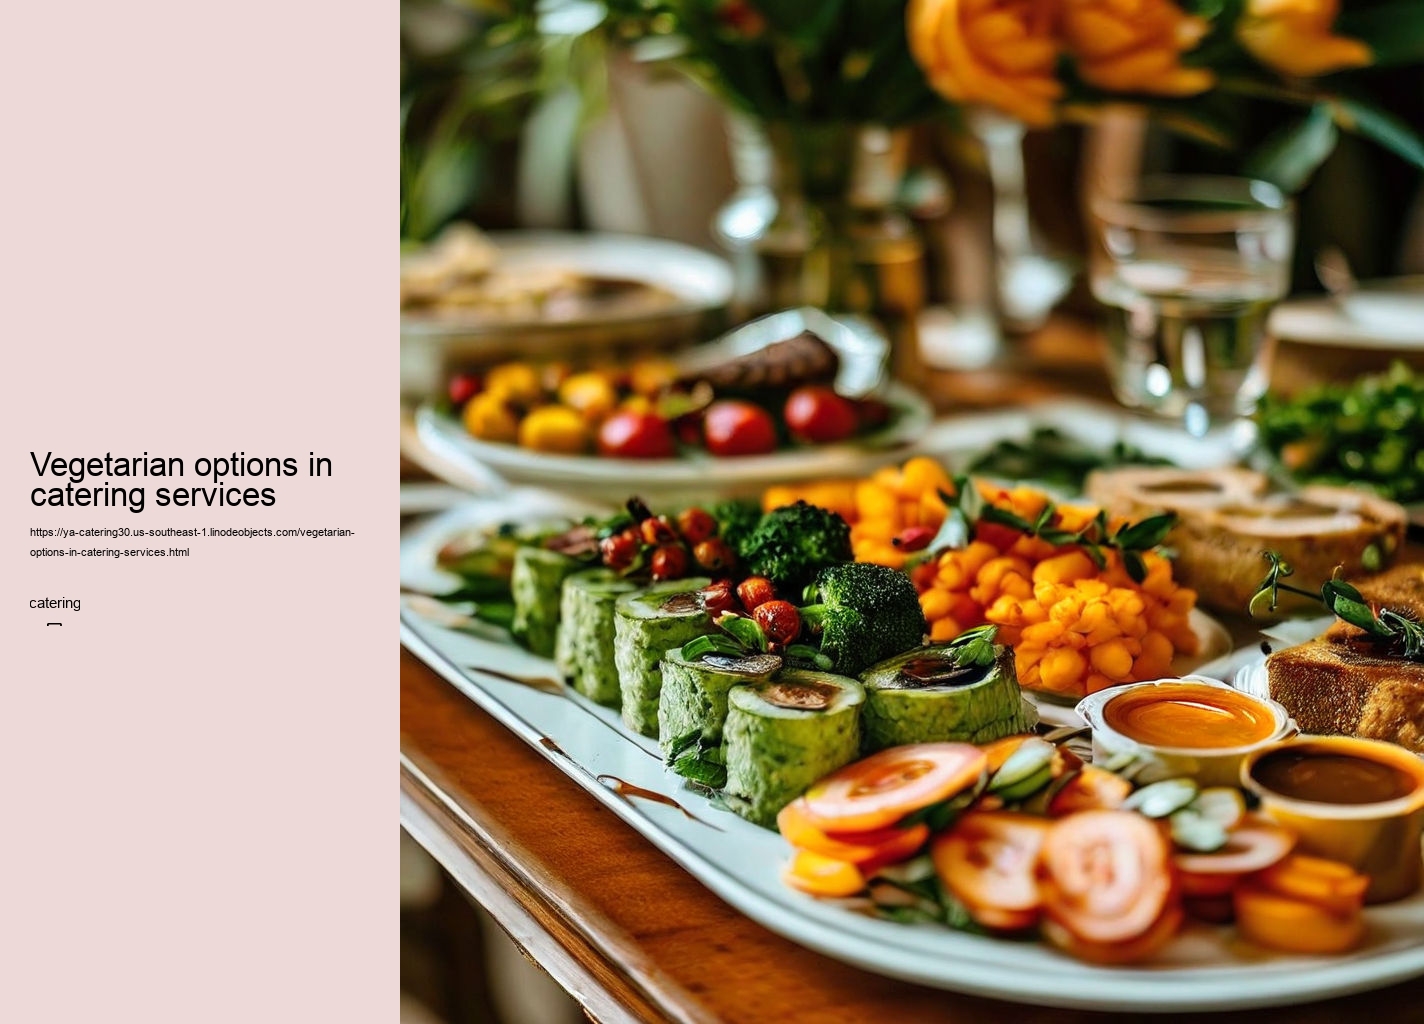 Vegetarian options in catering services